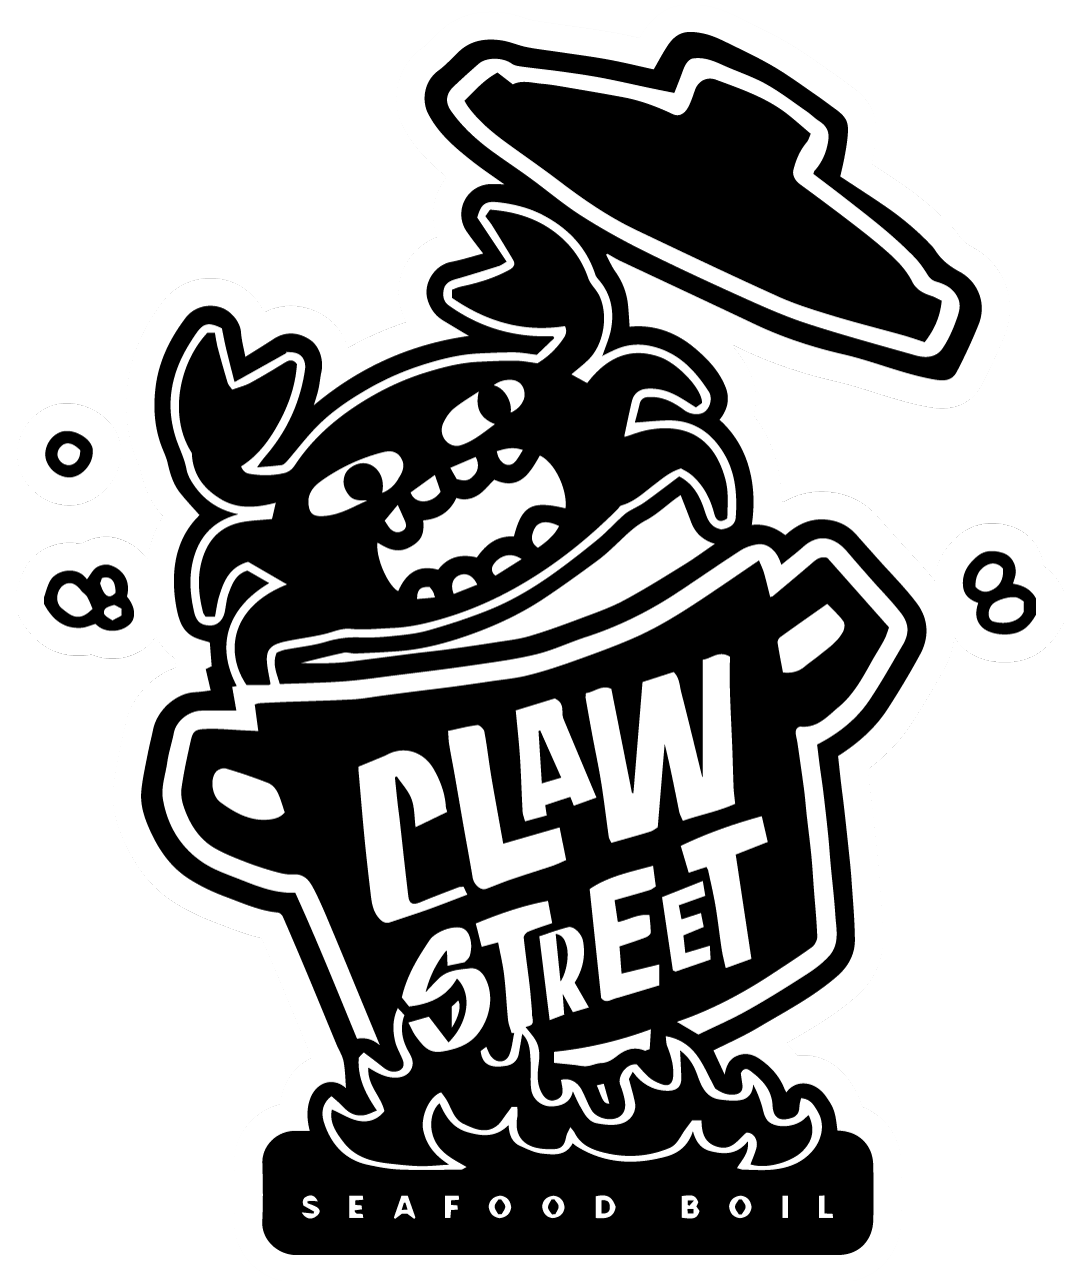 CLAW STREET Home